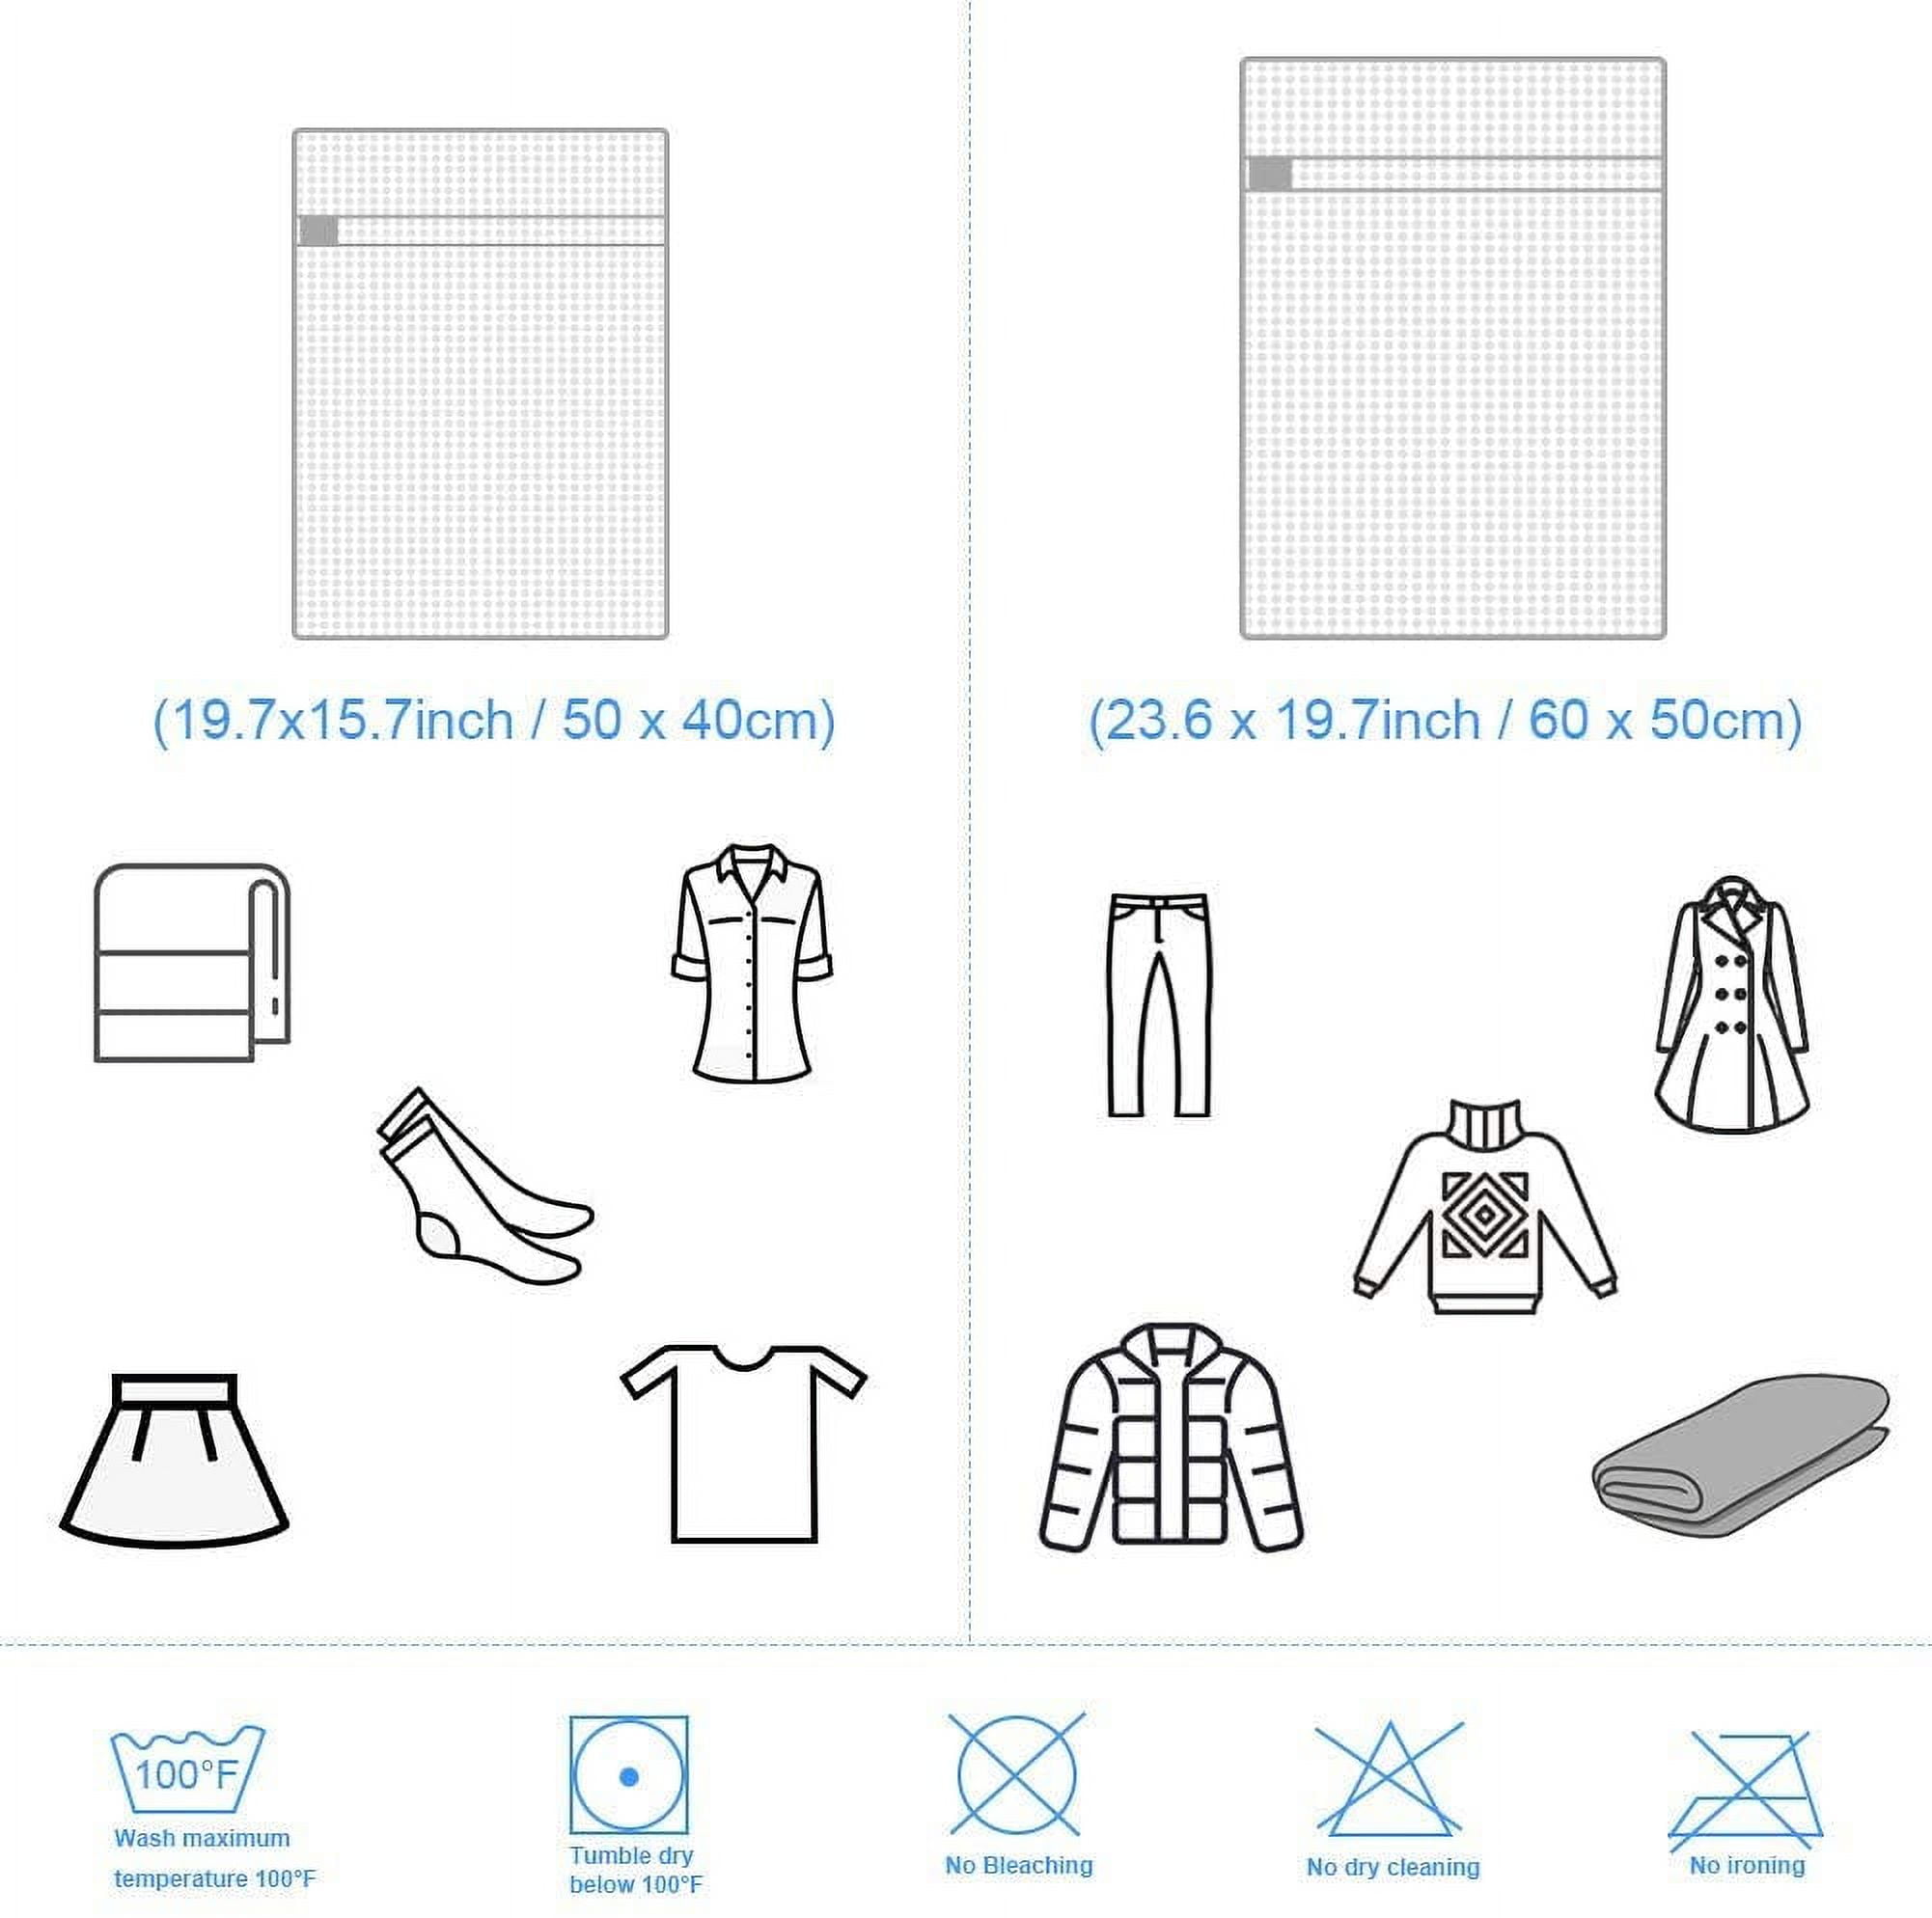 WBTEER 9-Piece Laundry Bag, Mesh Laundry Bag with Zipper, Lingerie Bags for  Washing Delicates, 3 Siz…See more WBTEER 9-Piece Laundry Bag, Mesh Laundry